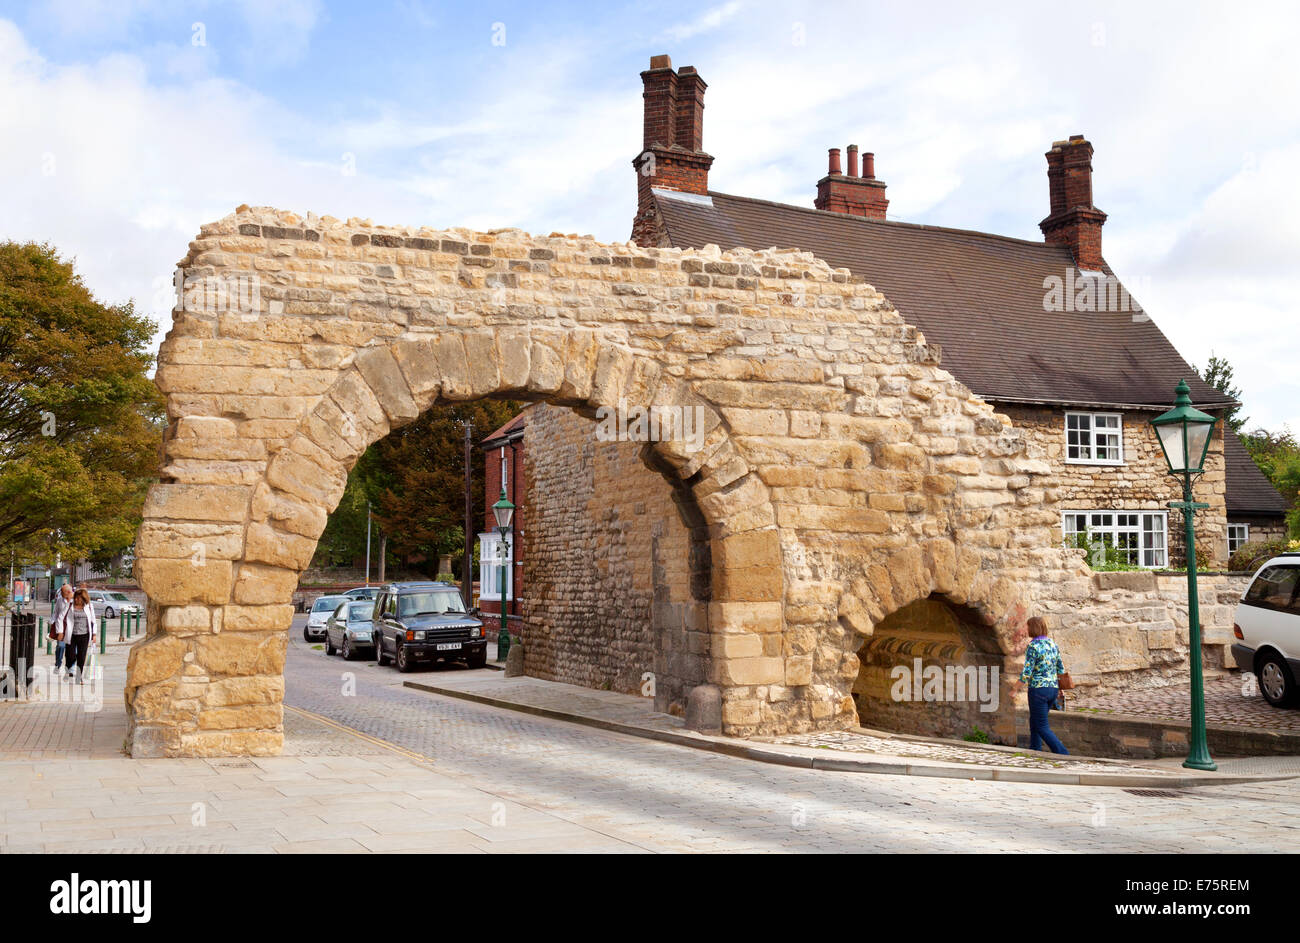 Newport Arch, Lincoln UK, an example of ancient Roman building dating from the 3rd century; Lincoln, UK Stock Photo